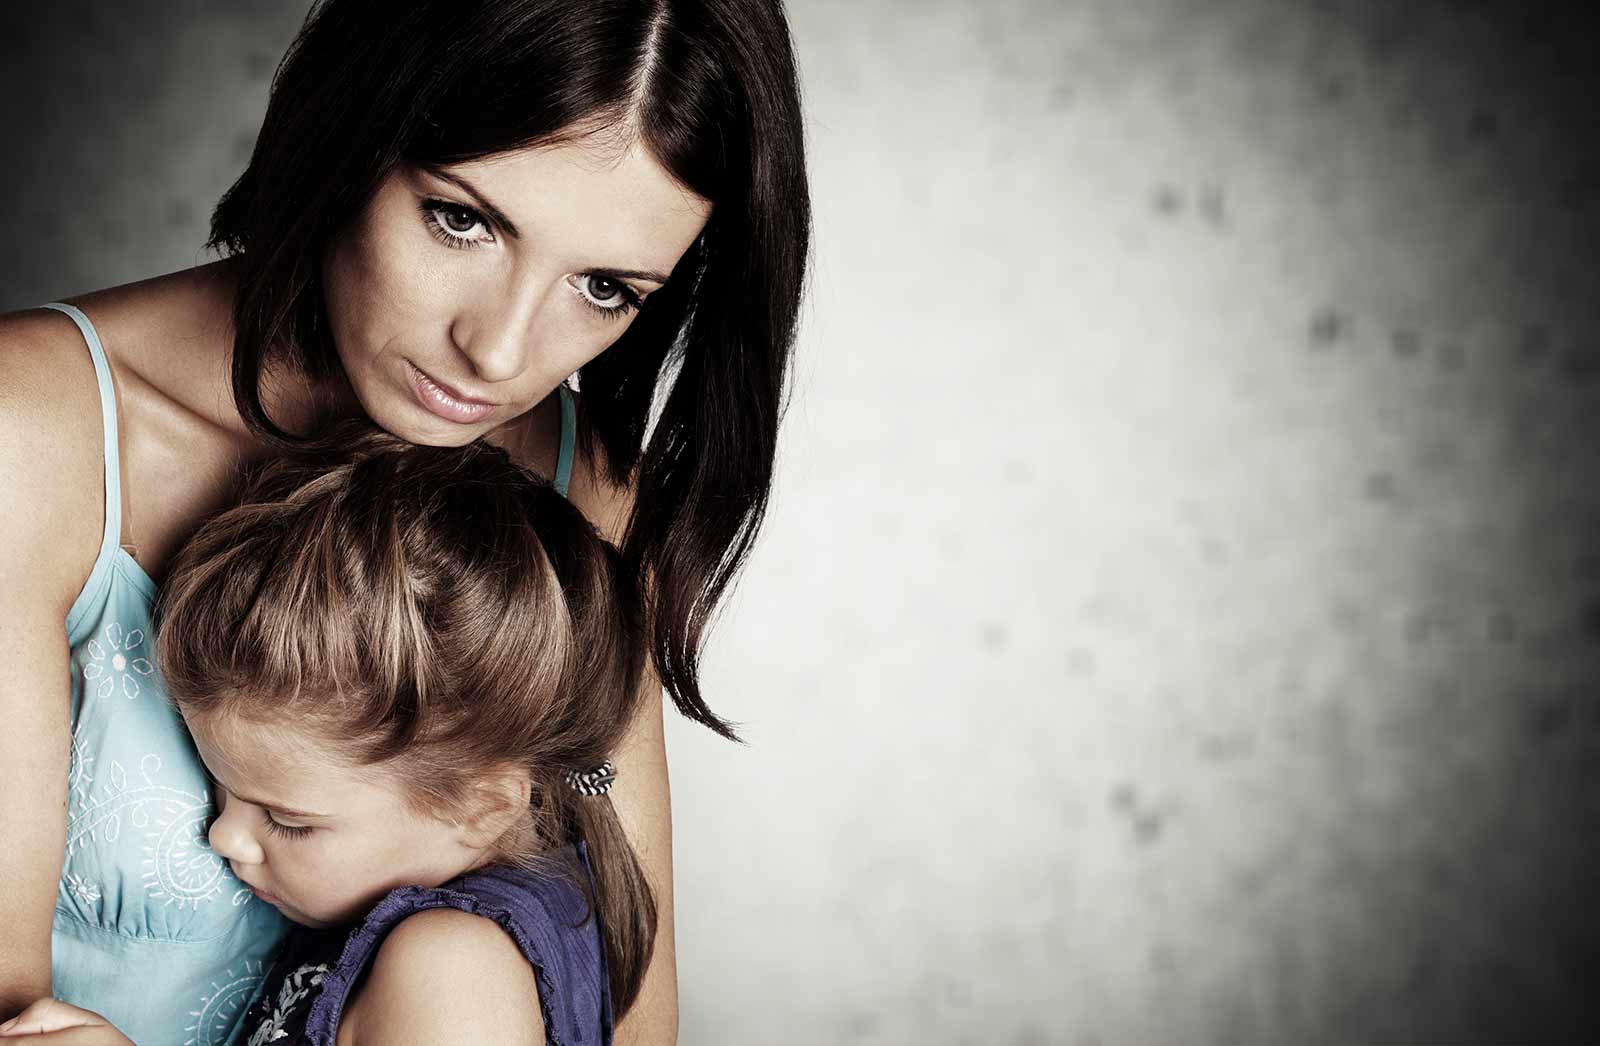 We help family domestic violence services support victims.